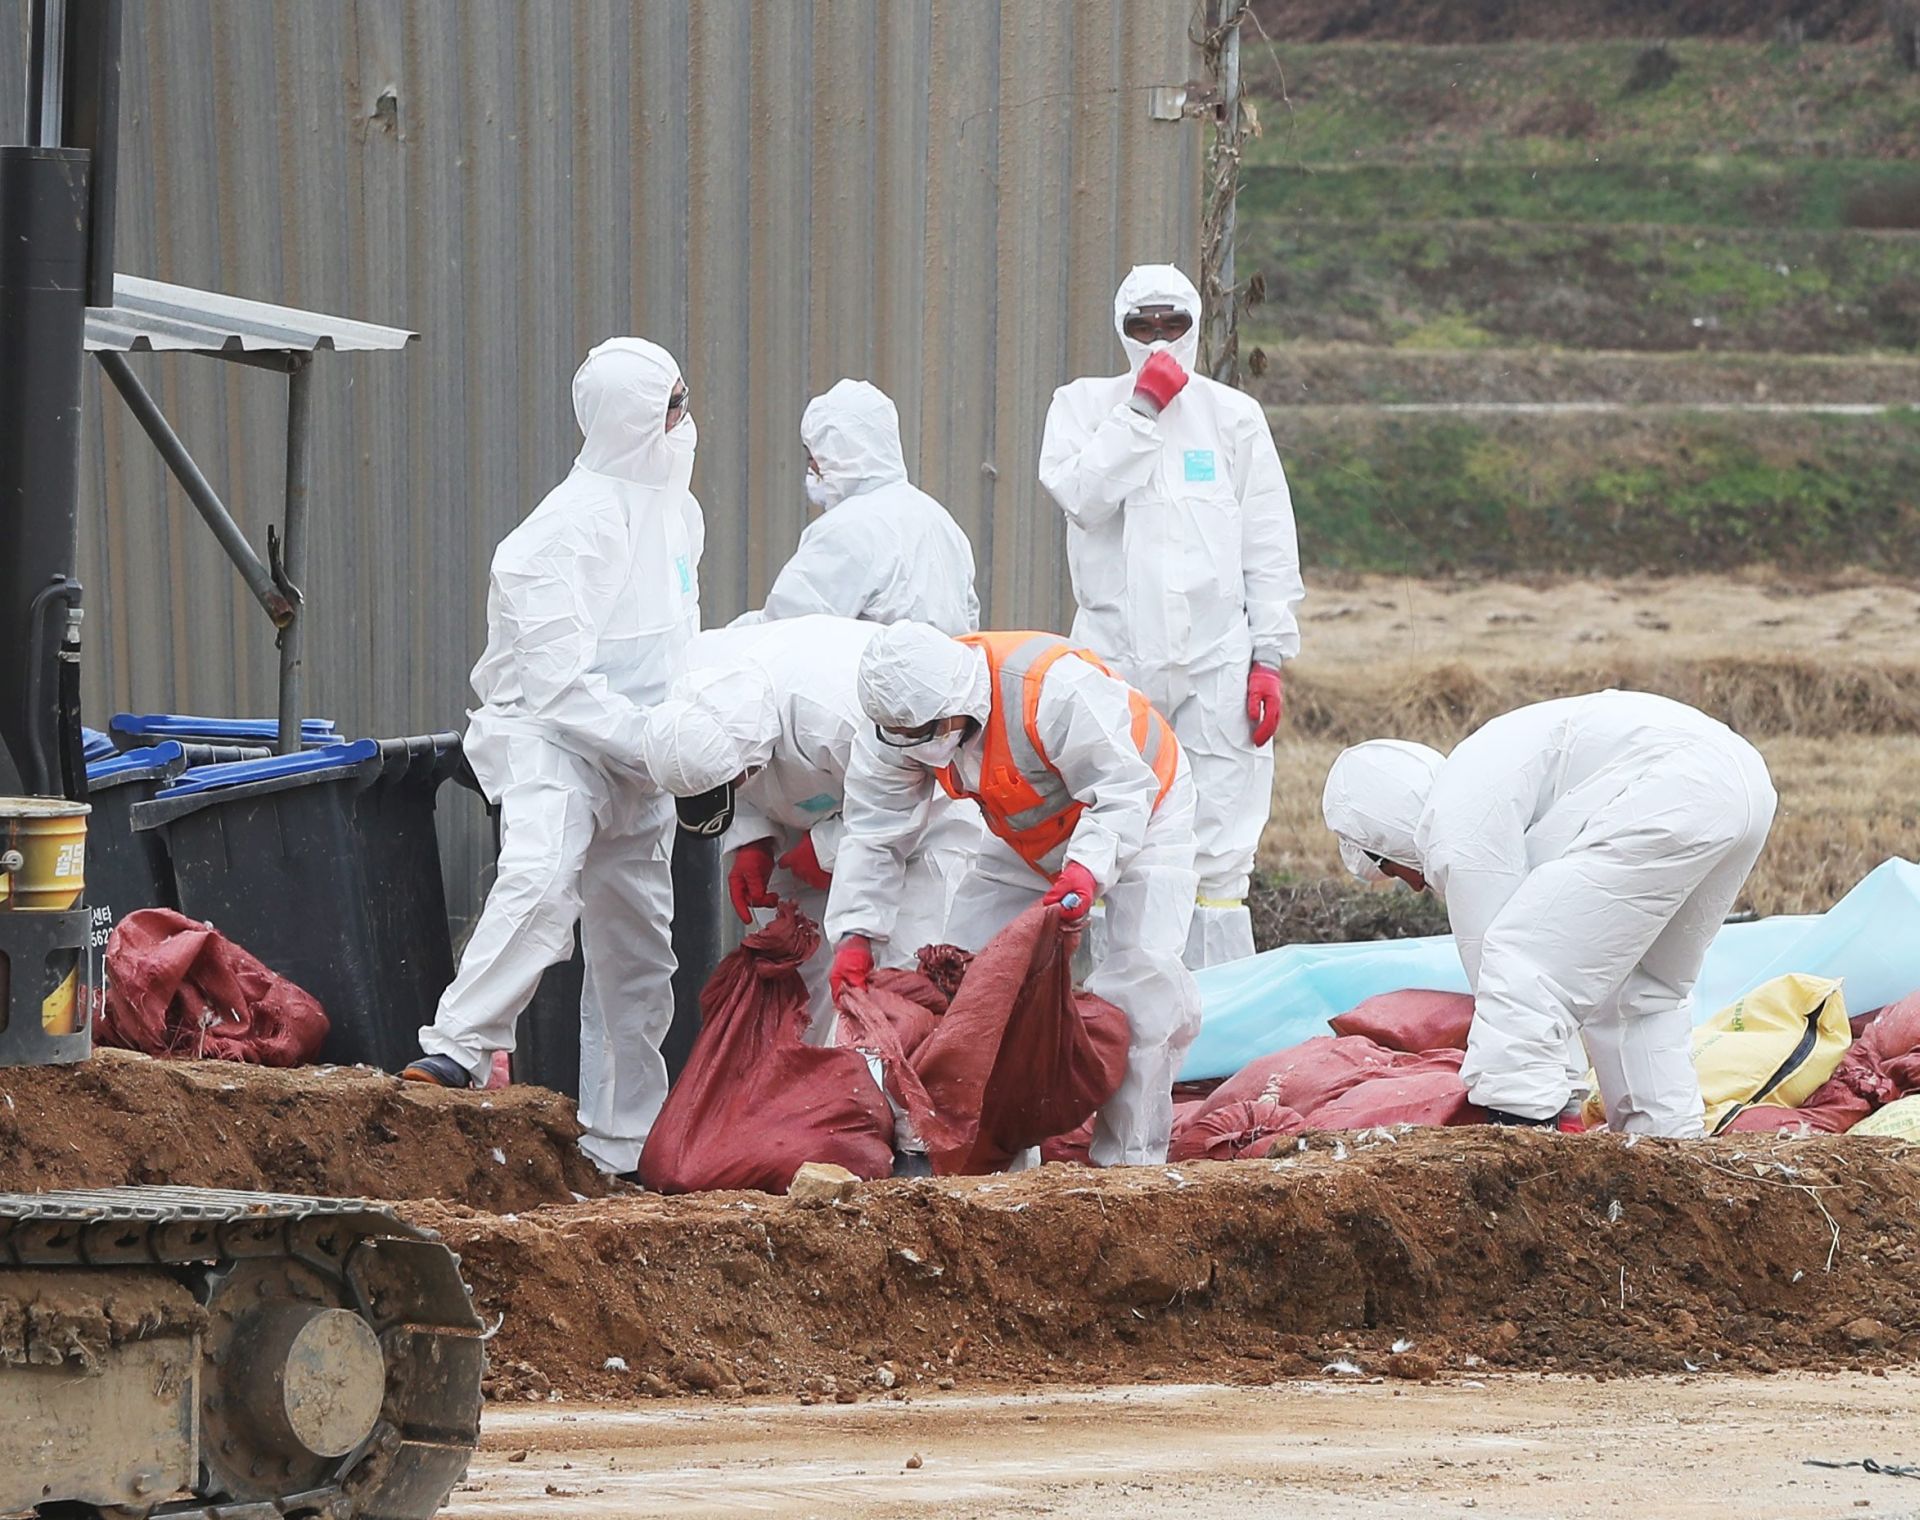 epa05653010 Local sanitation officials work at a farm in Hwaseong, south of Seoul, South Korea, 30 November 2016, to cull chickens and disinfect the area after a suspected avian flu case reported by the farm on the previous day. South Korea has recently seen a series of bird flu outbreaks.  EPA/YONHAP SOUTH KOREA OUT